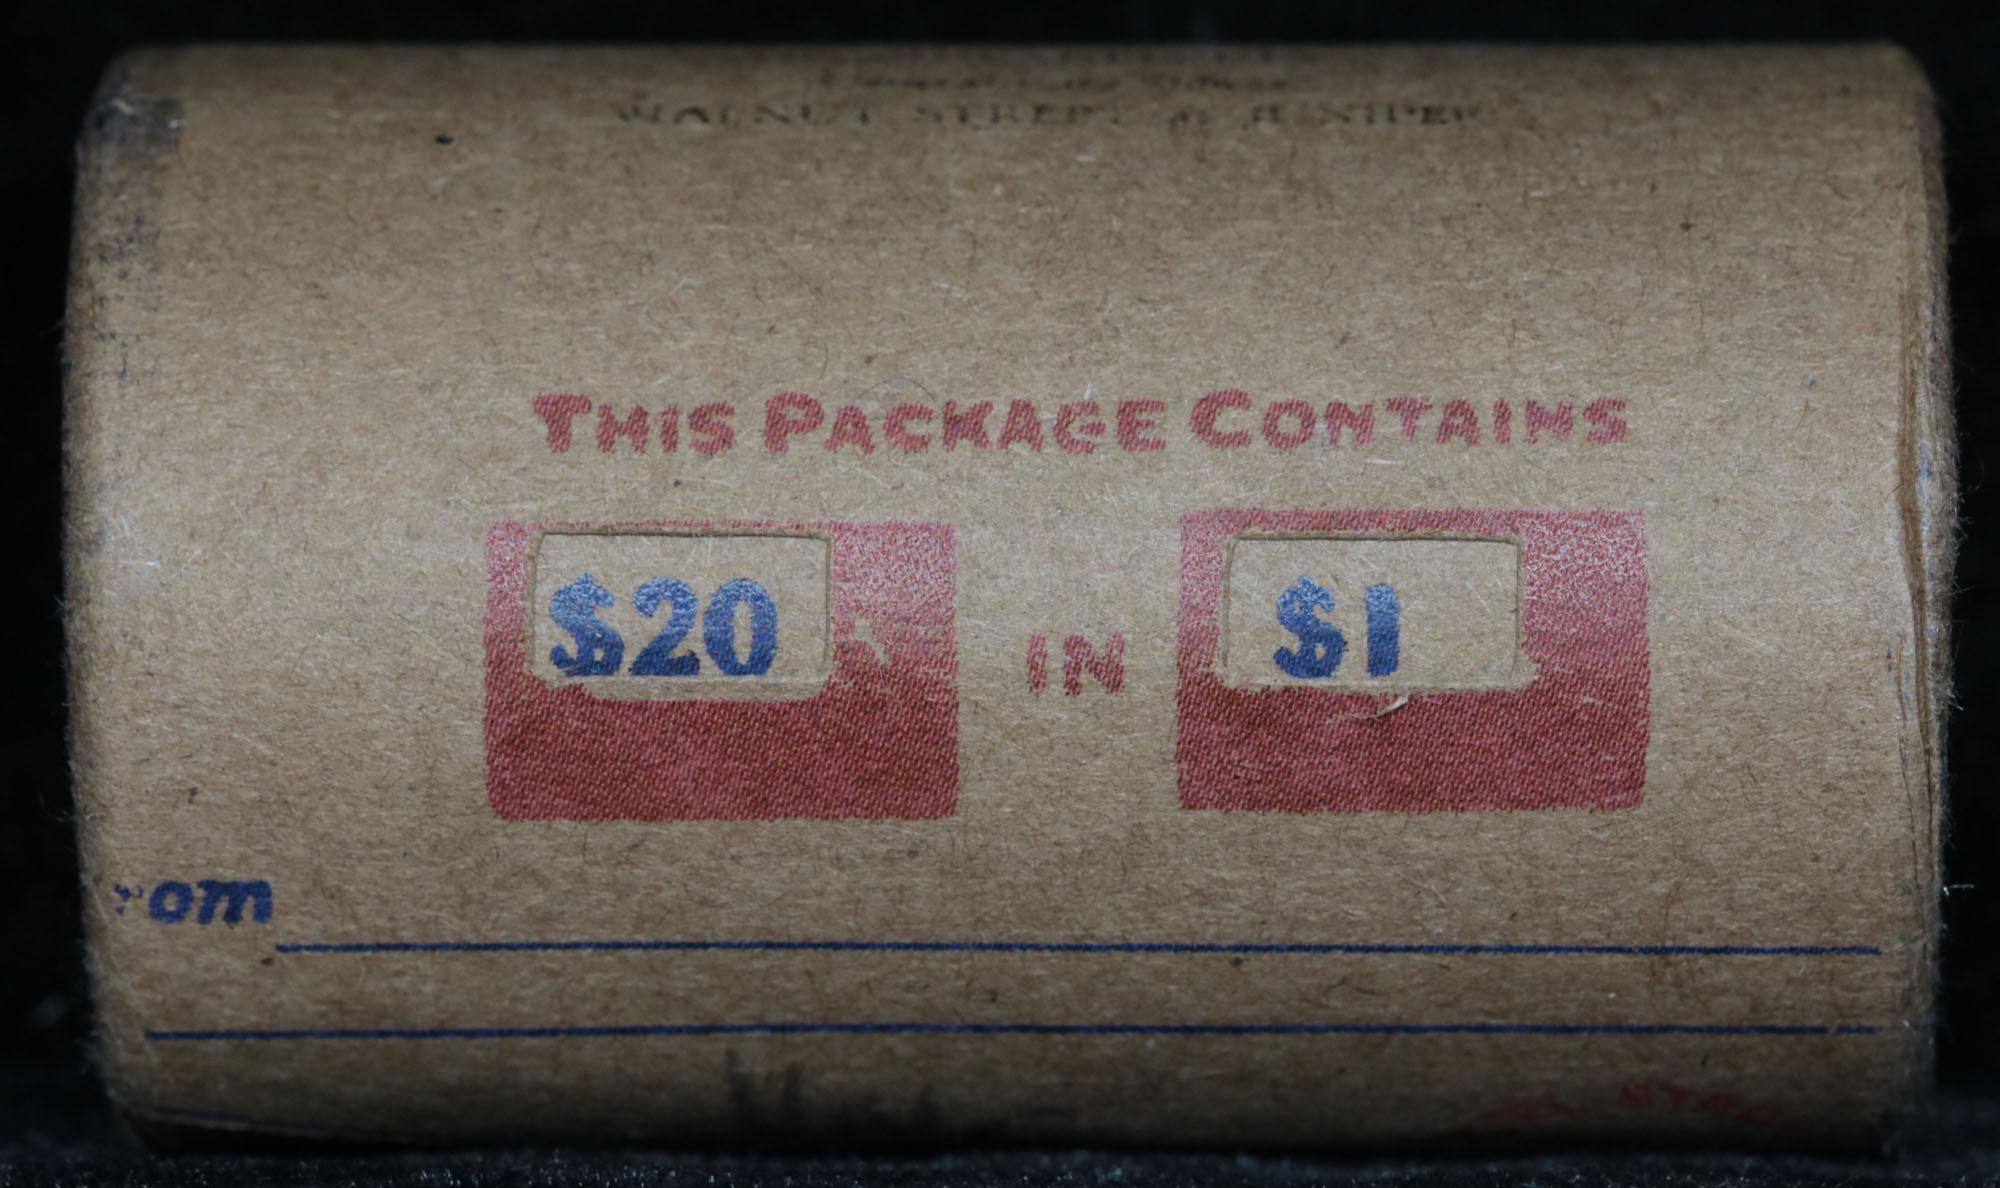 *Auction Highlight* Incredible Find, Uncirculated Morgan $1 Shotgun Roll w/1889 & cc mint ends  (fc)